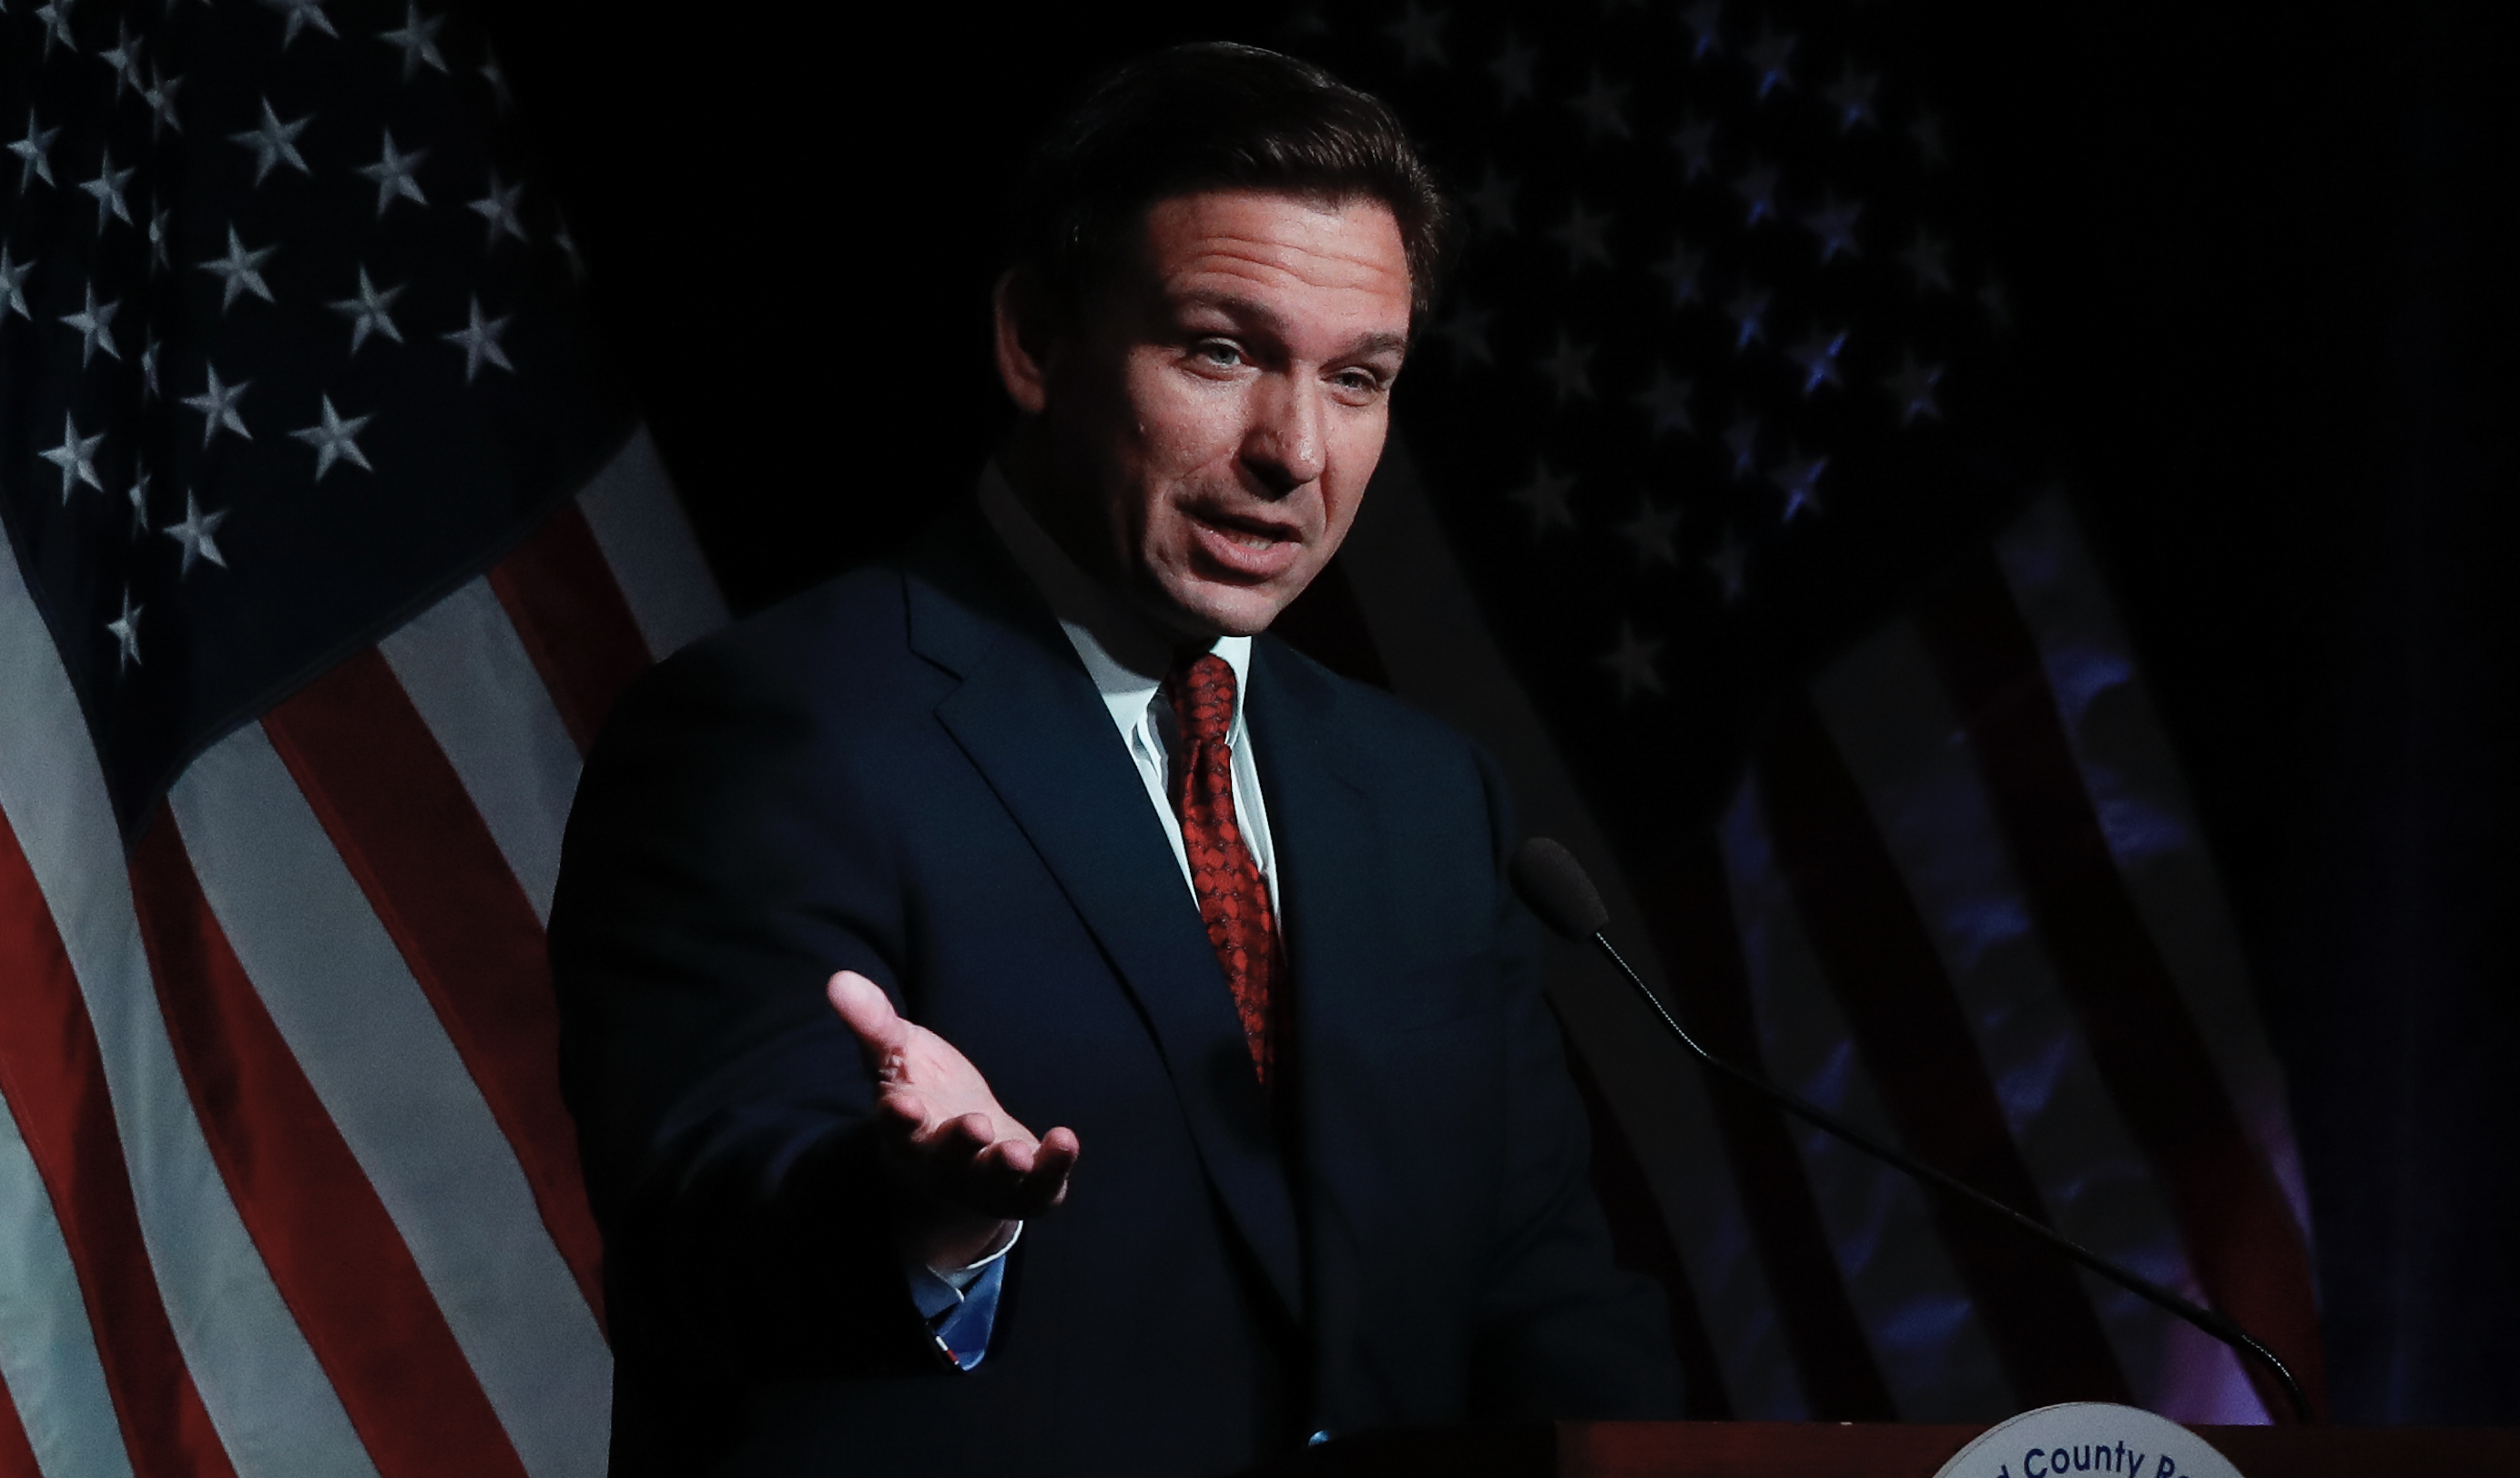 DeSantis: Republicans Have Developed ‘A Culture Of Losing,’ In Florida We Have ‘A Culture Of Winning’